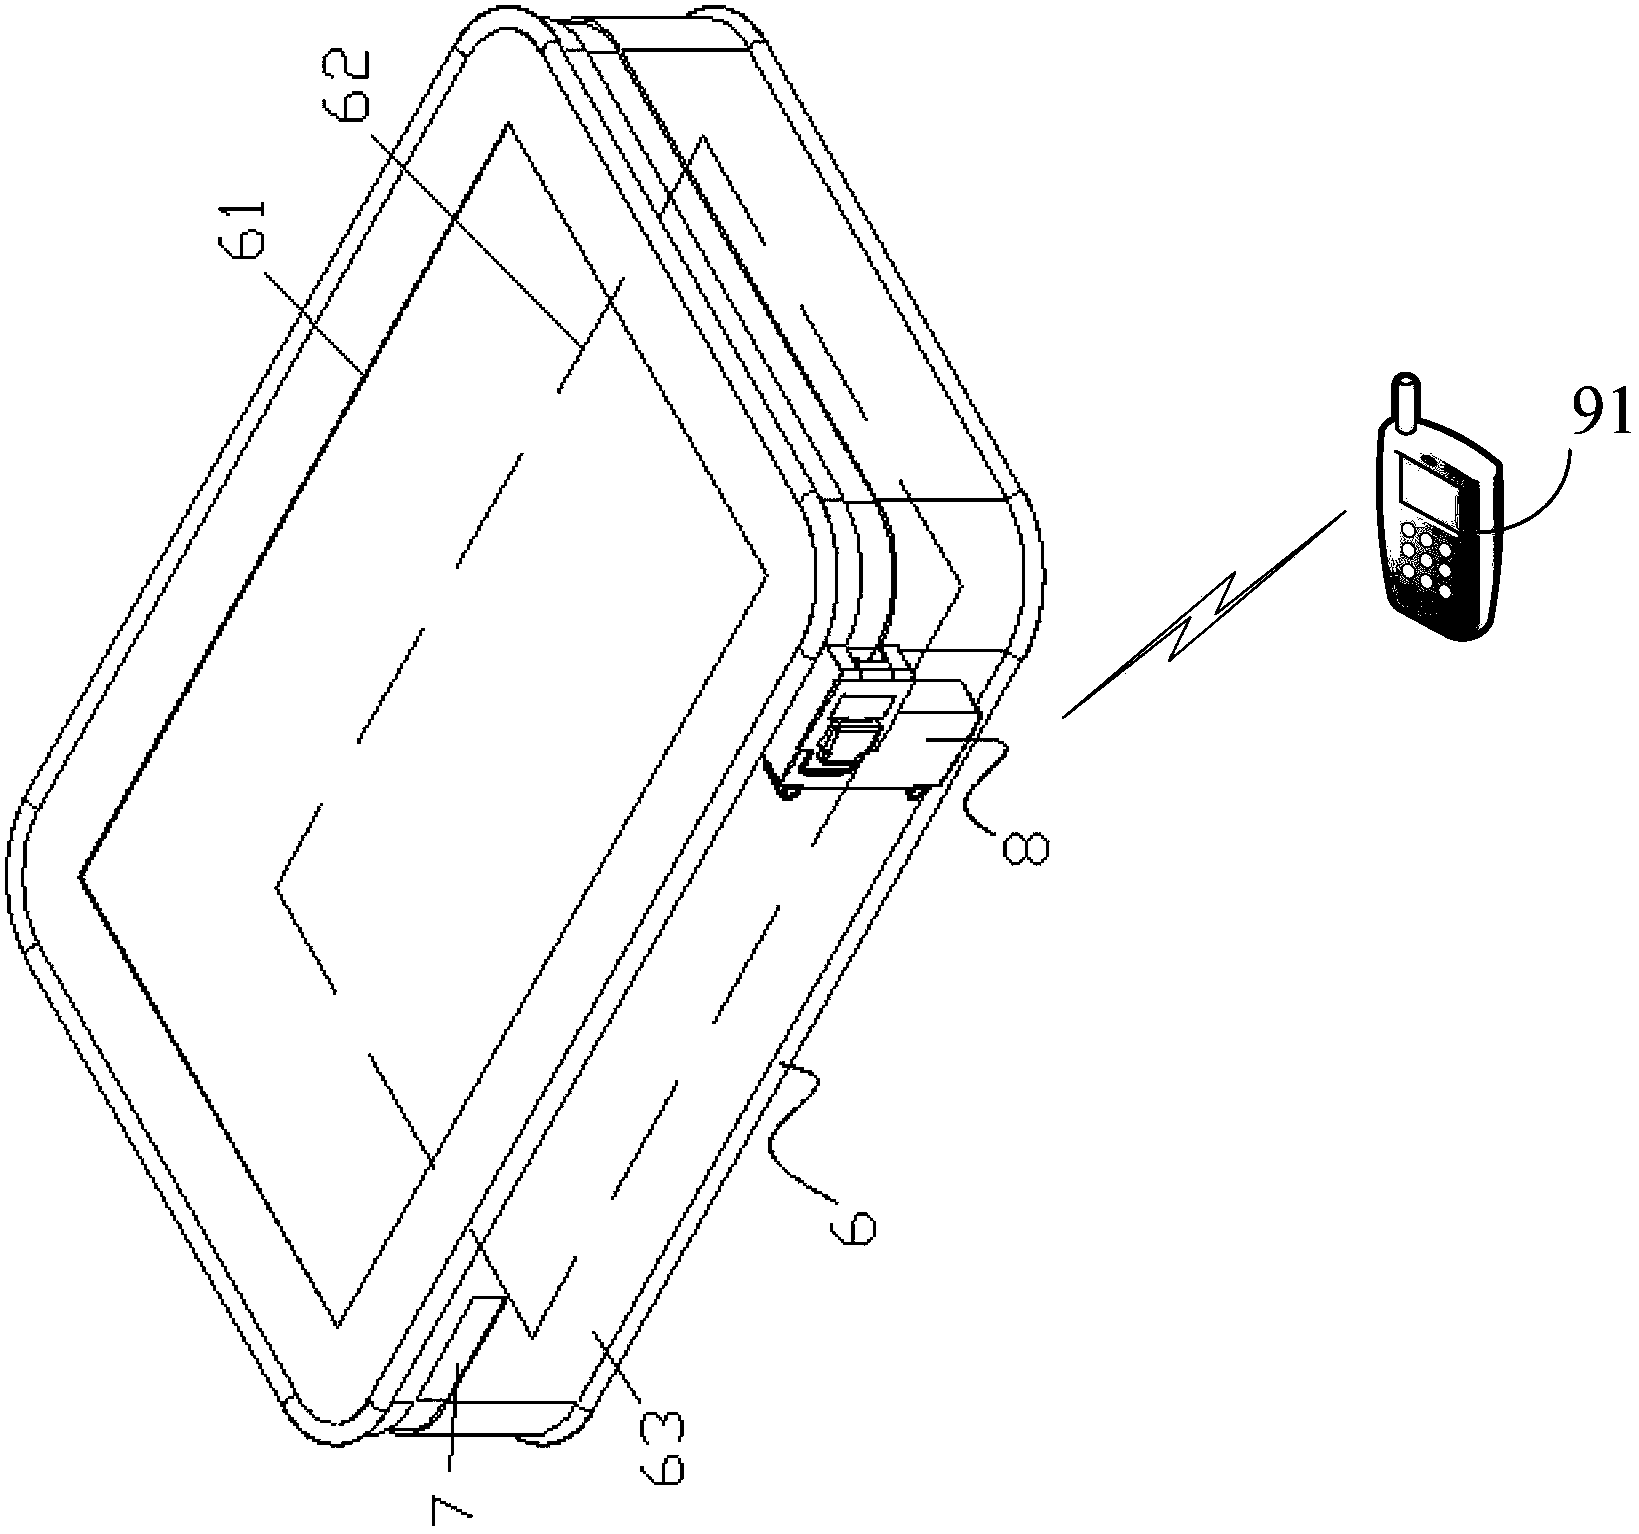 Banknote conveying bag device capable of authenticating in a bidirectional mode